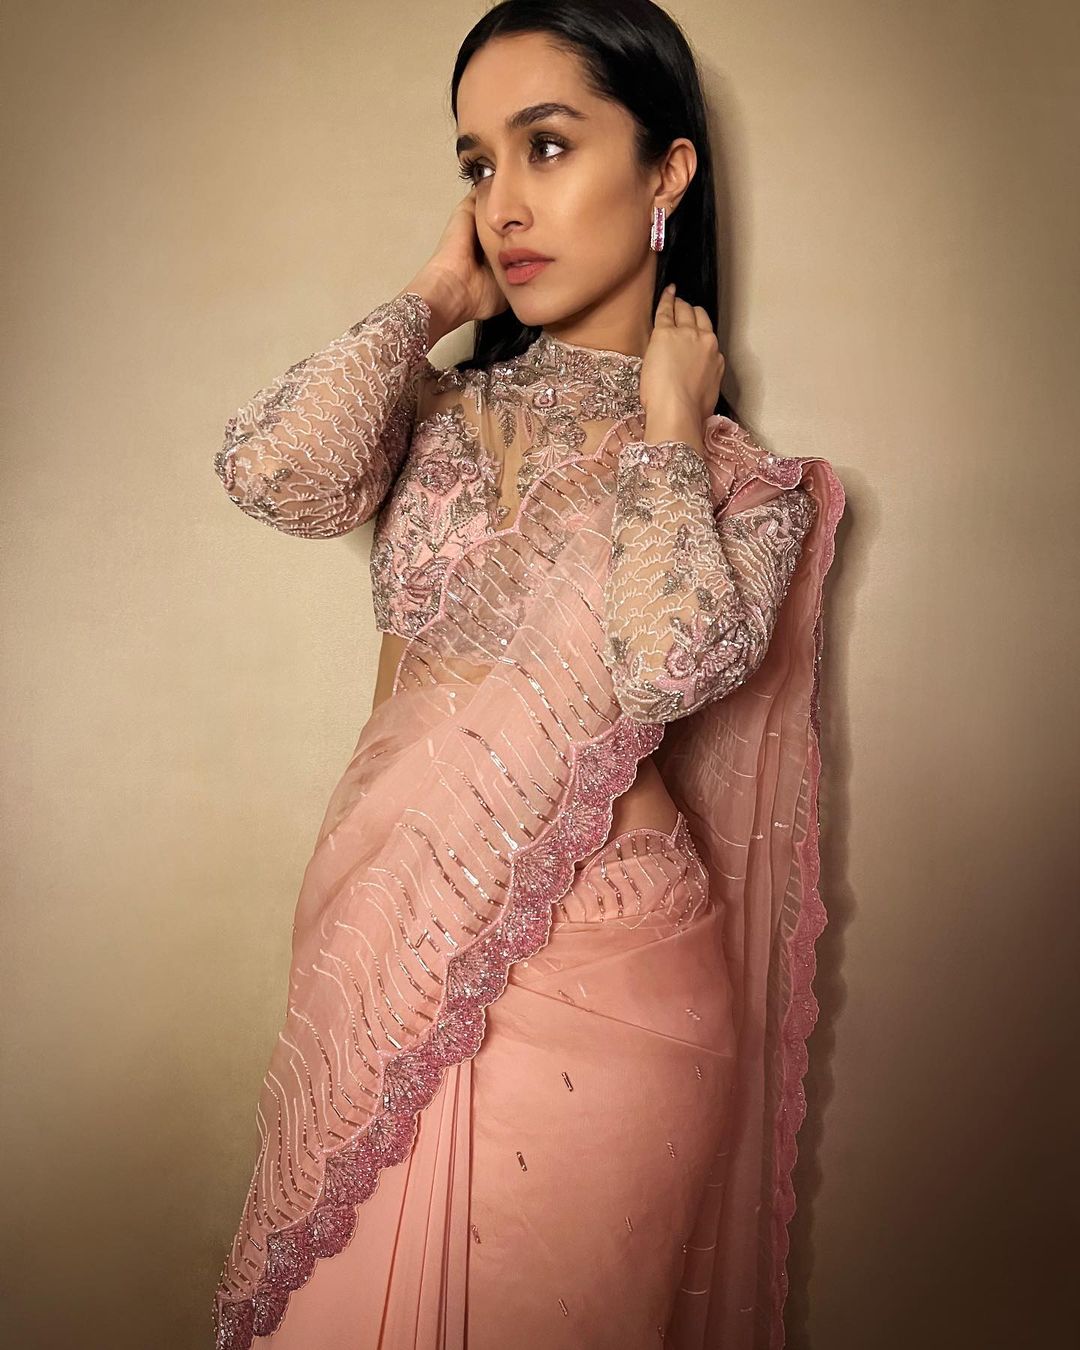 Saree Blouse Designs 2022. Shraddha Kapoor in a pink High-neck sheer blouse